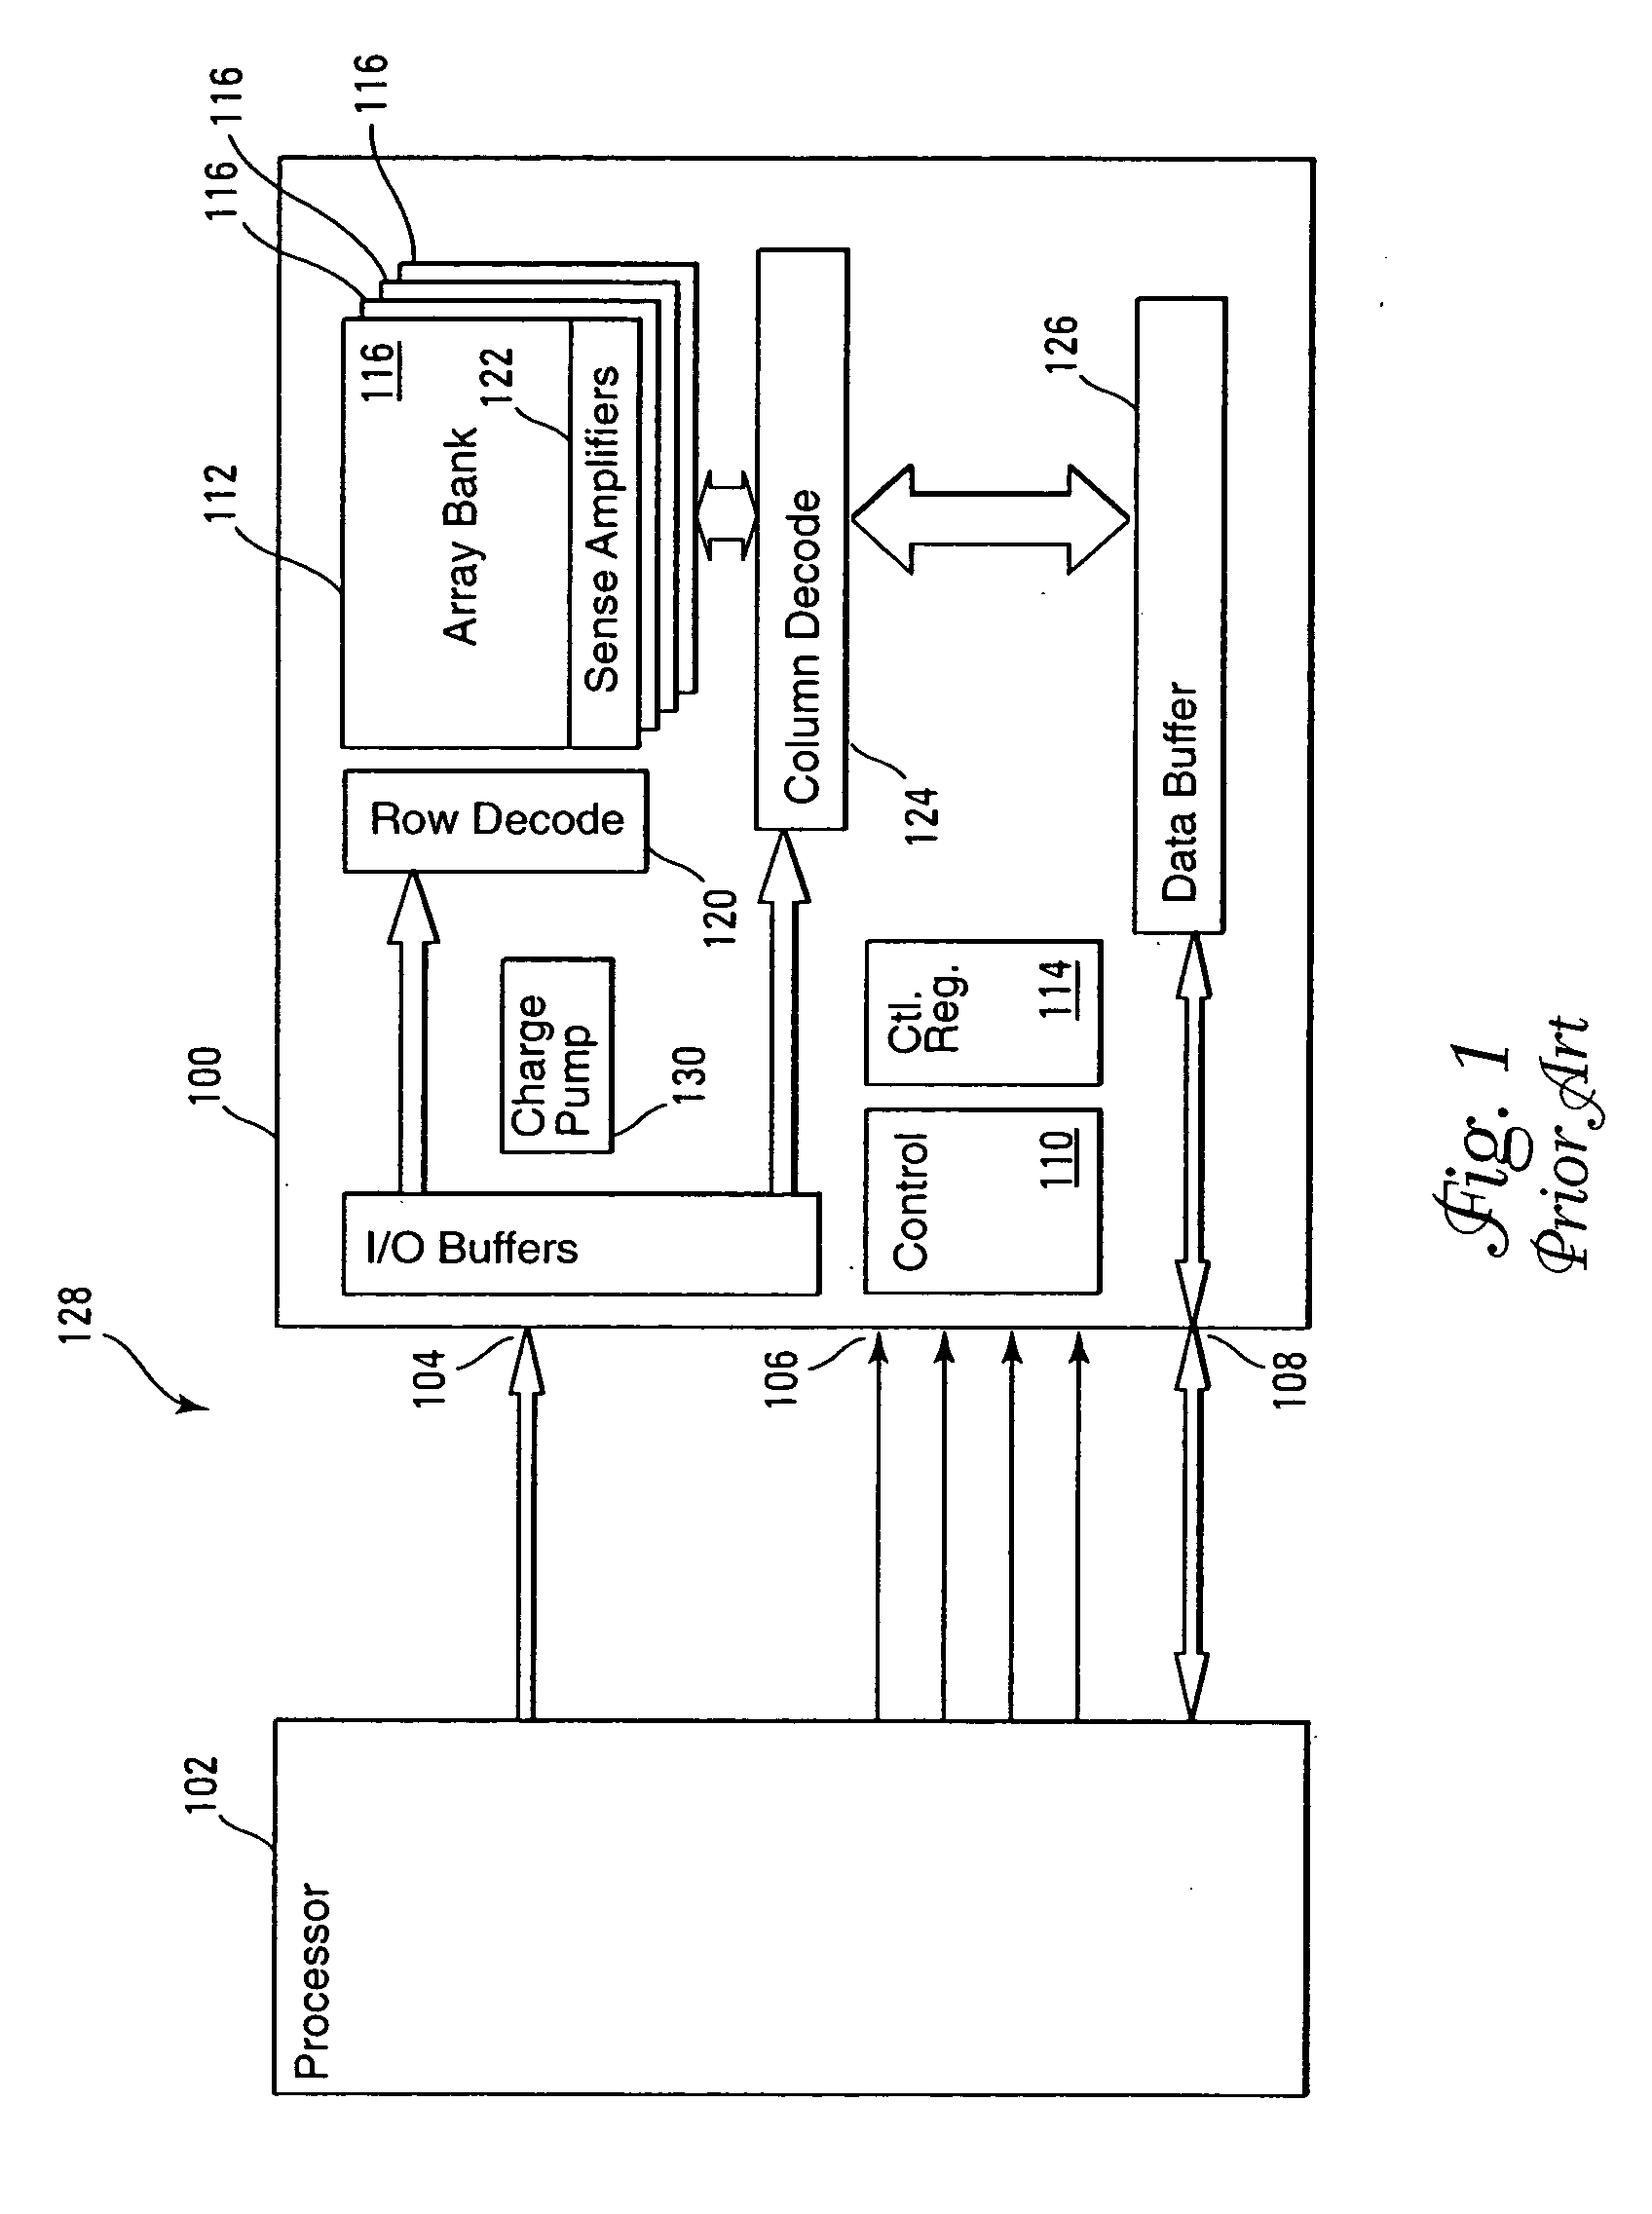 High voltage regulator for low voltage integrated circuit processes